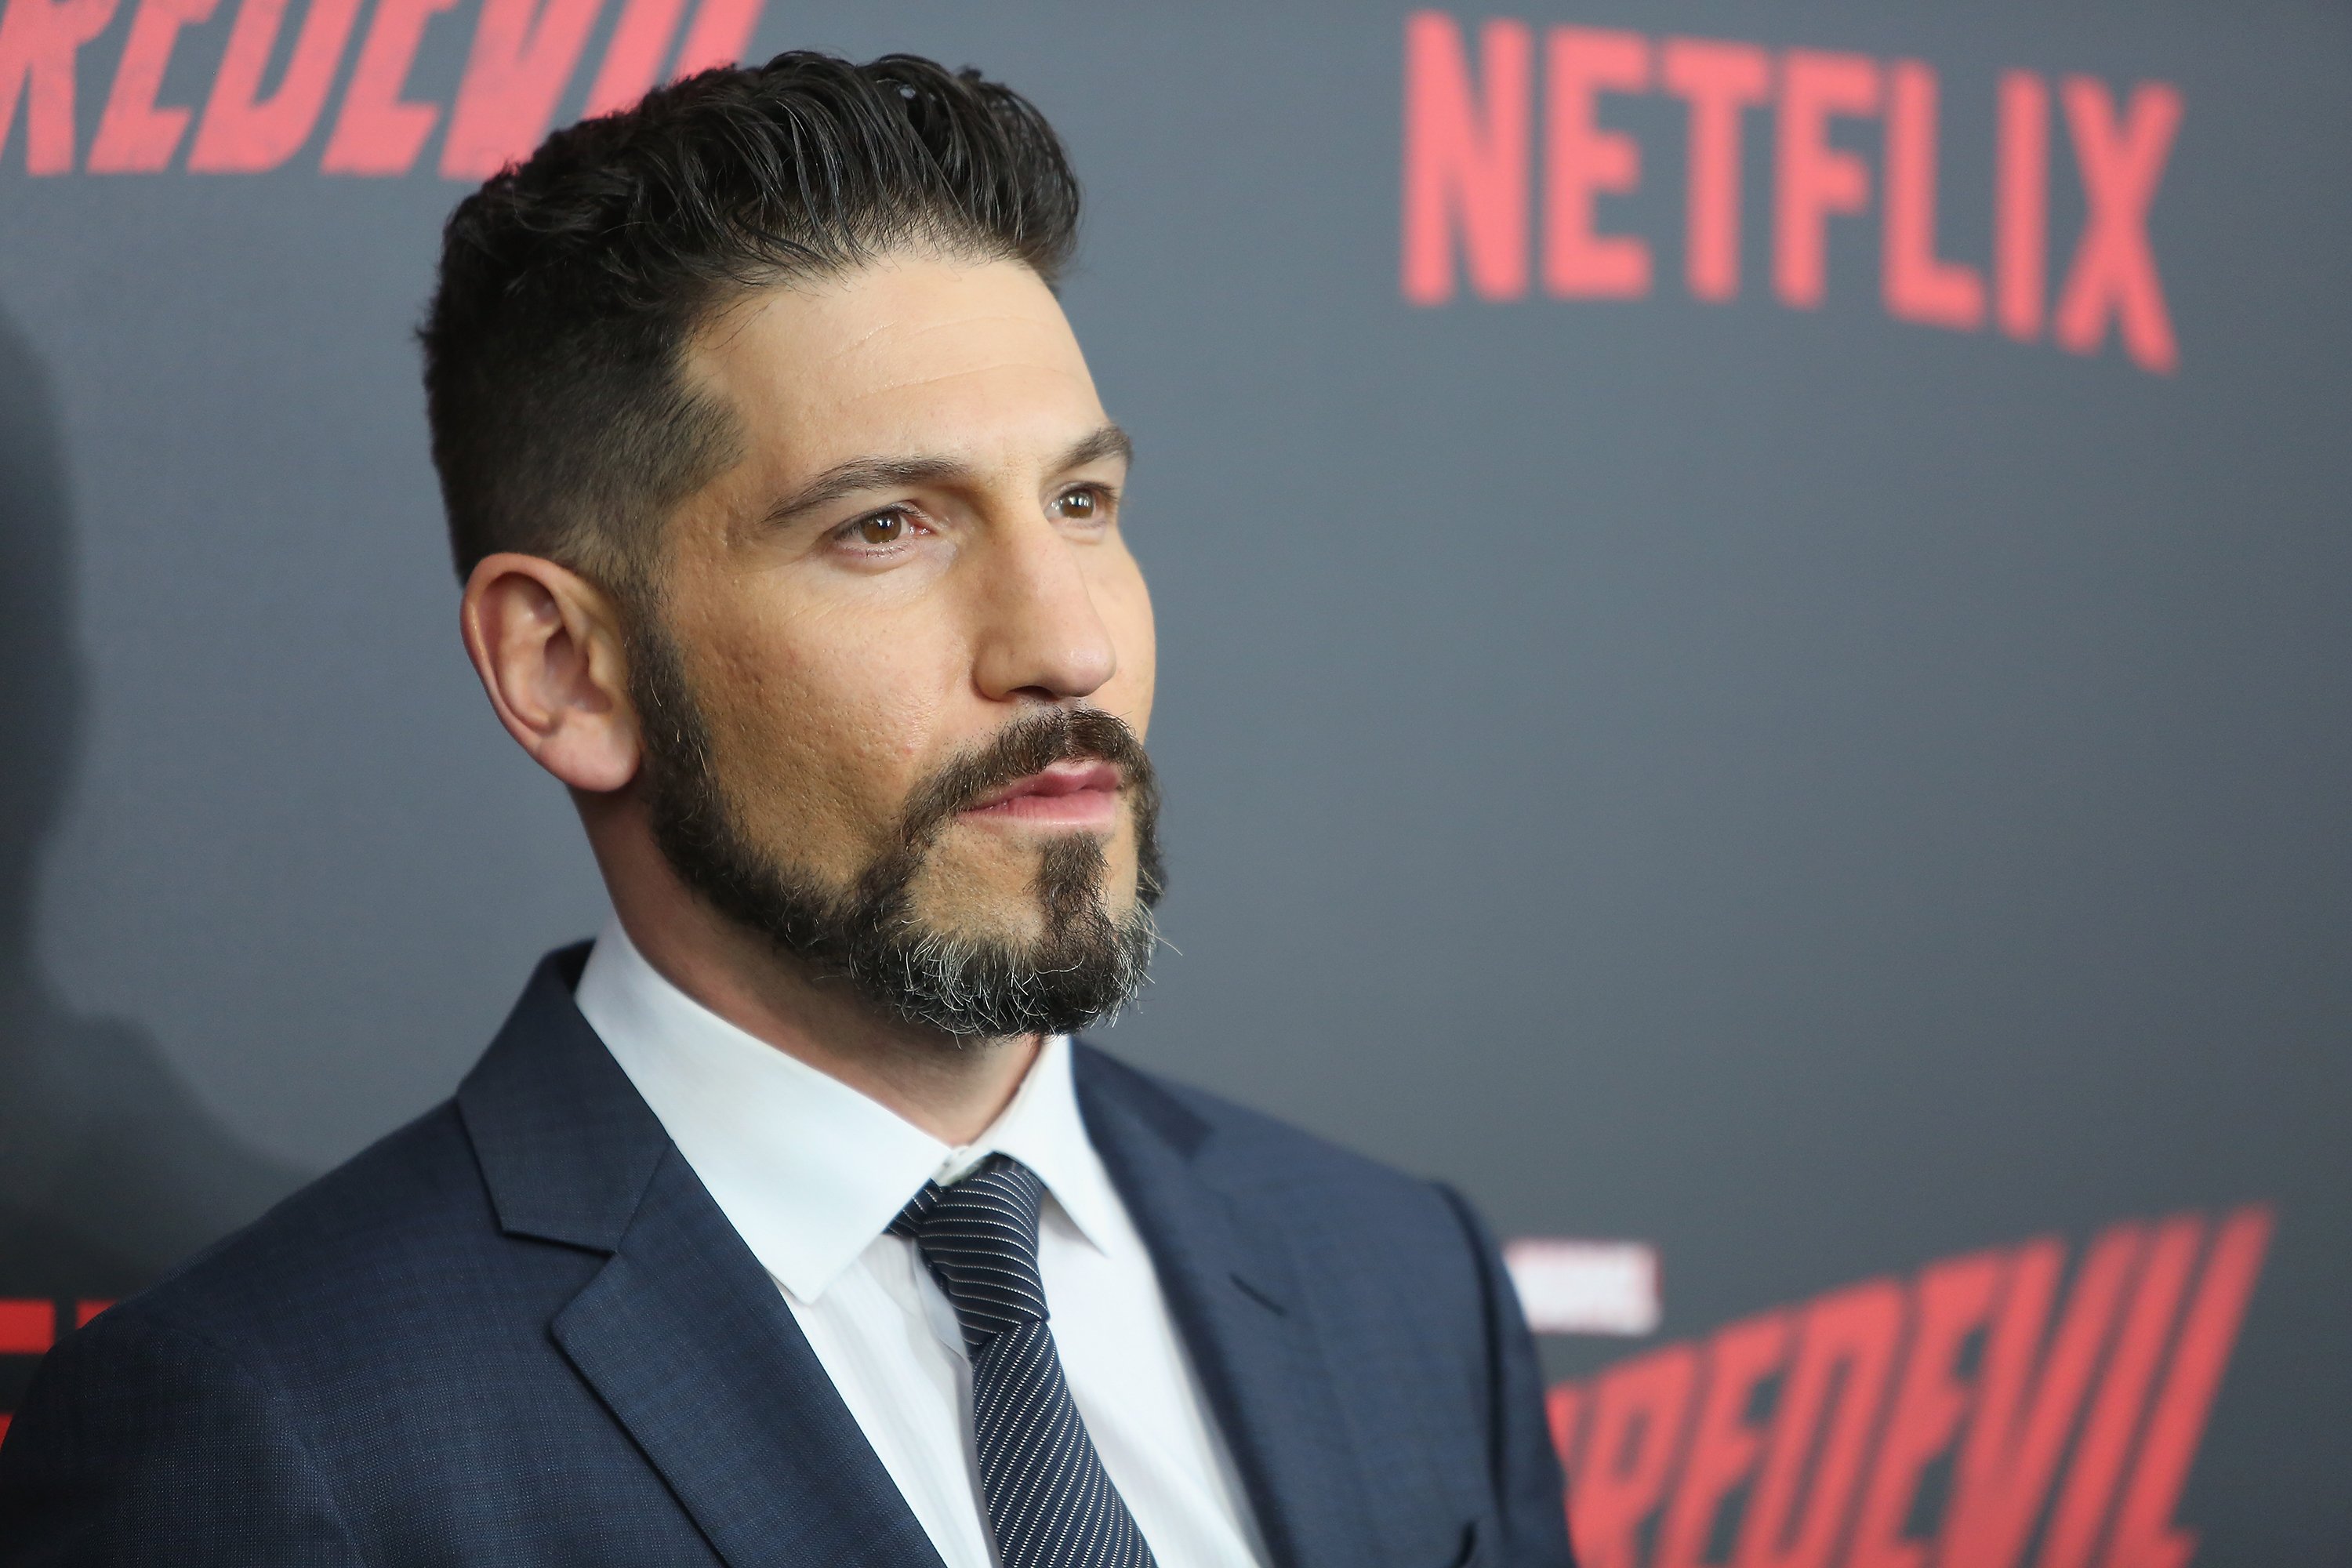 Jon Bernthal, who played the Punisher in the MCU, wears a black suit over a white button-up shirt and black and white striped tie.